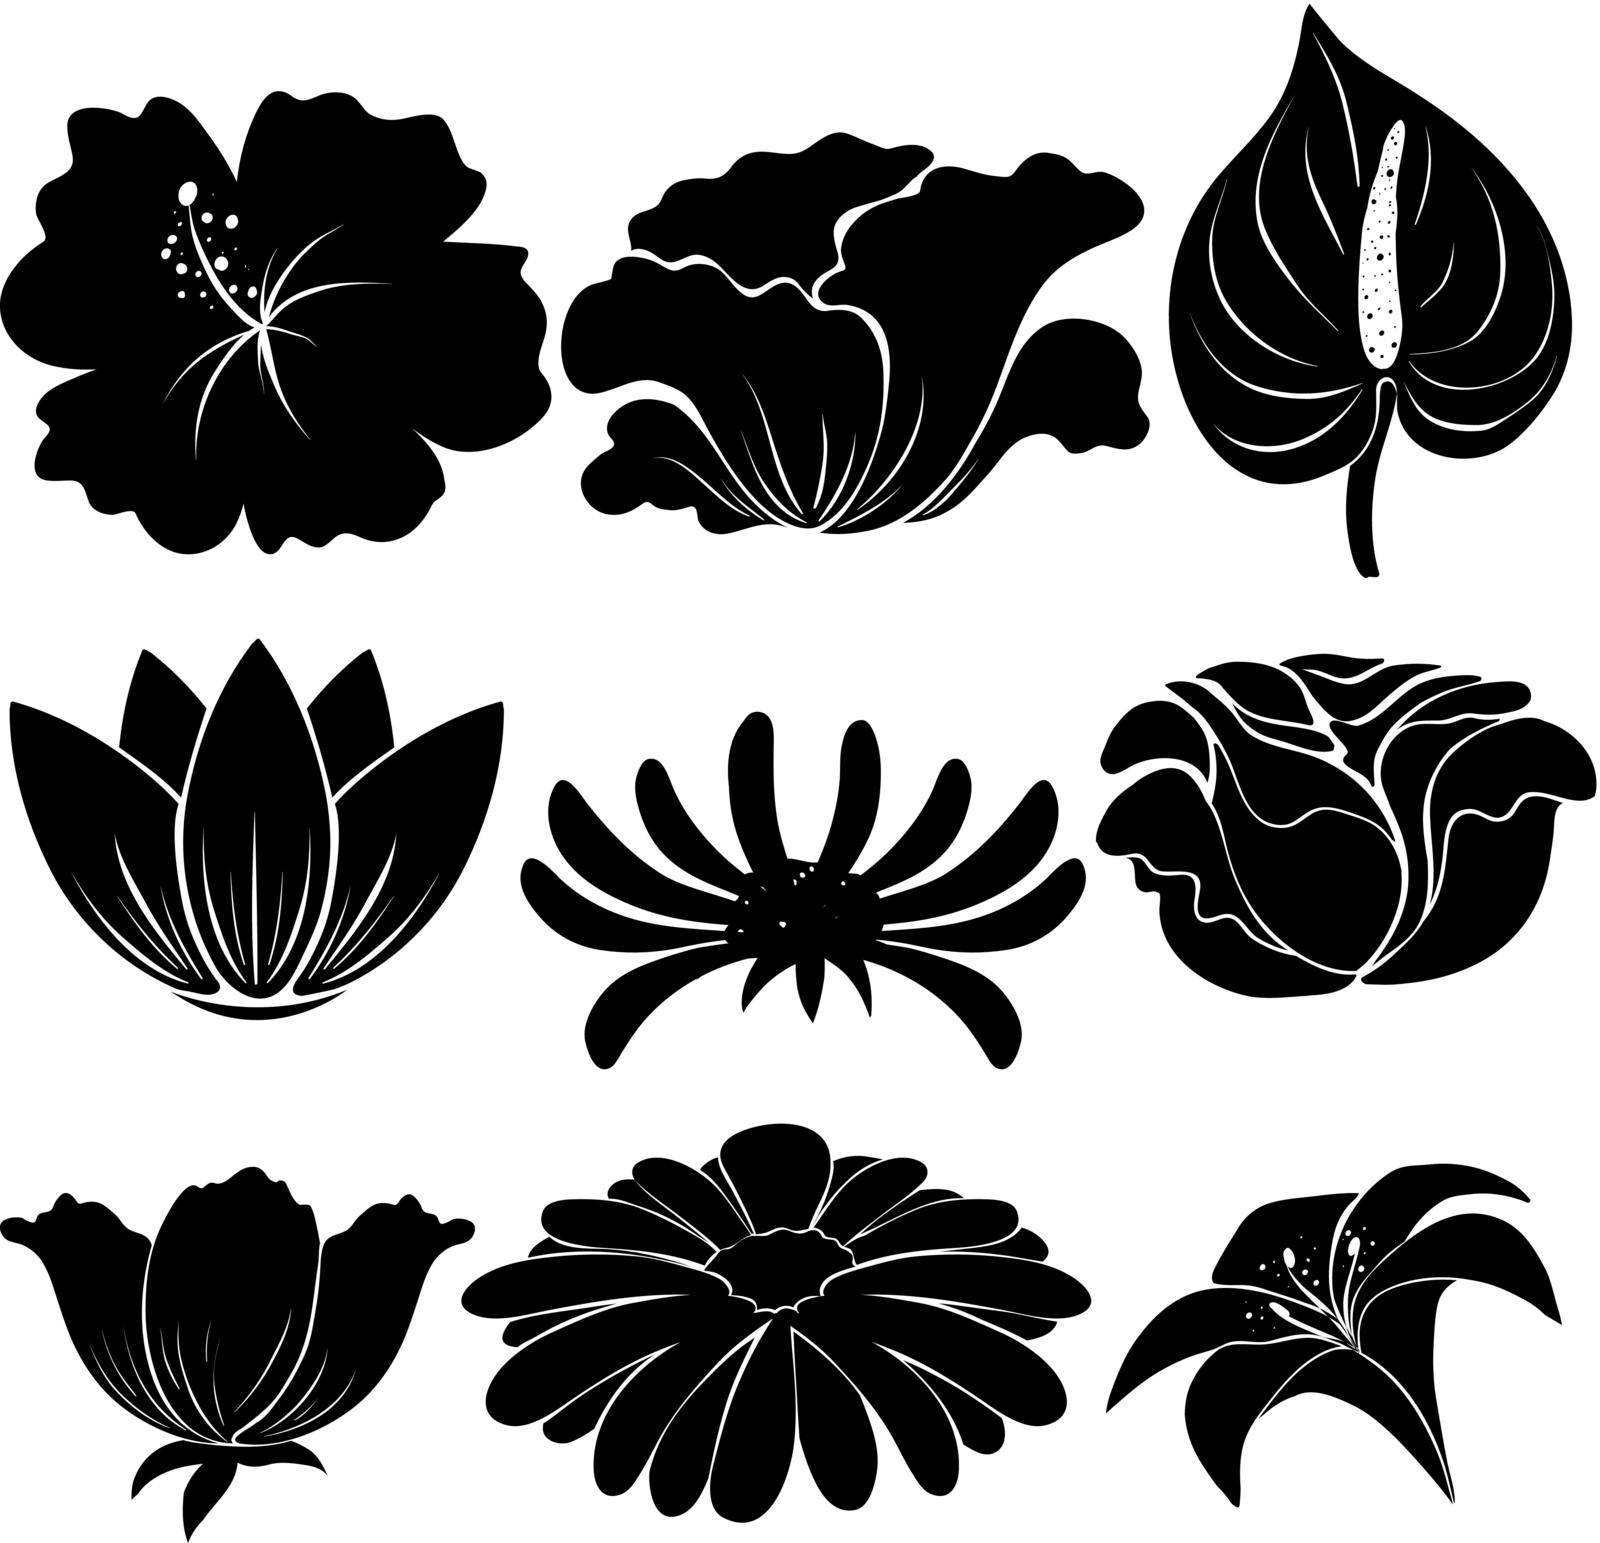 Black templates of plants on a white background